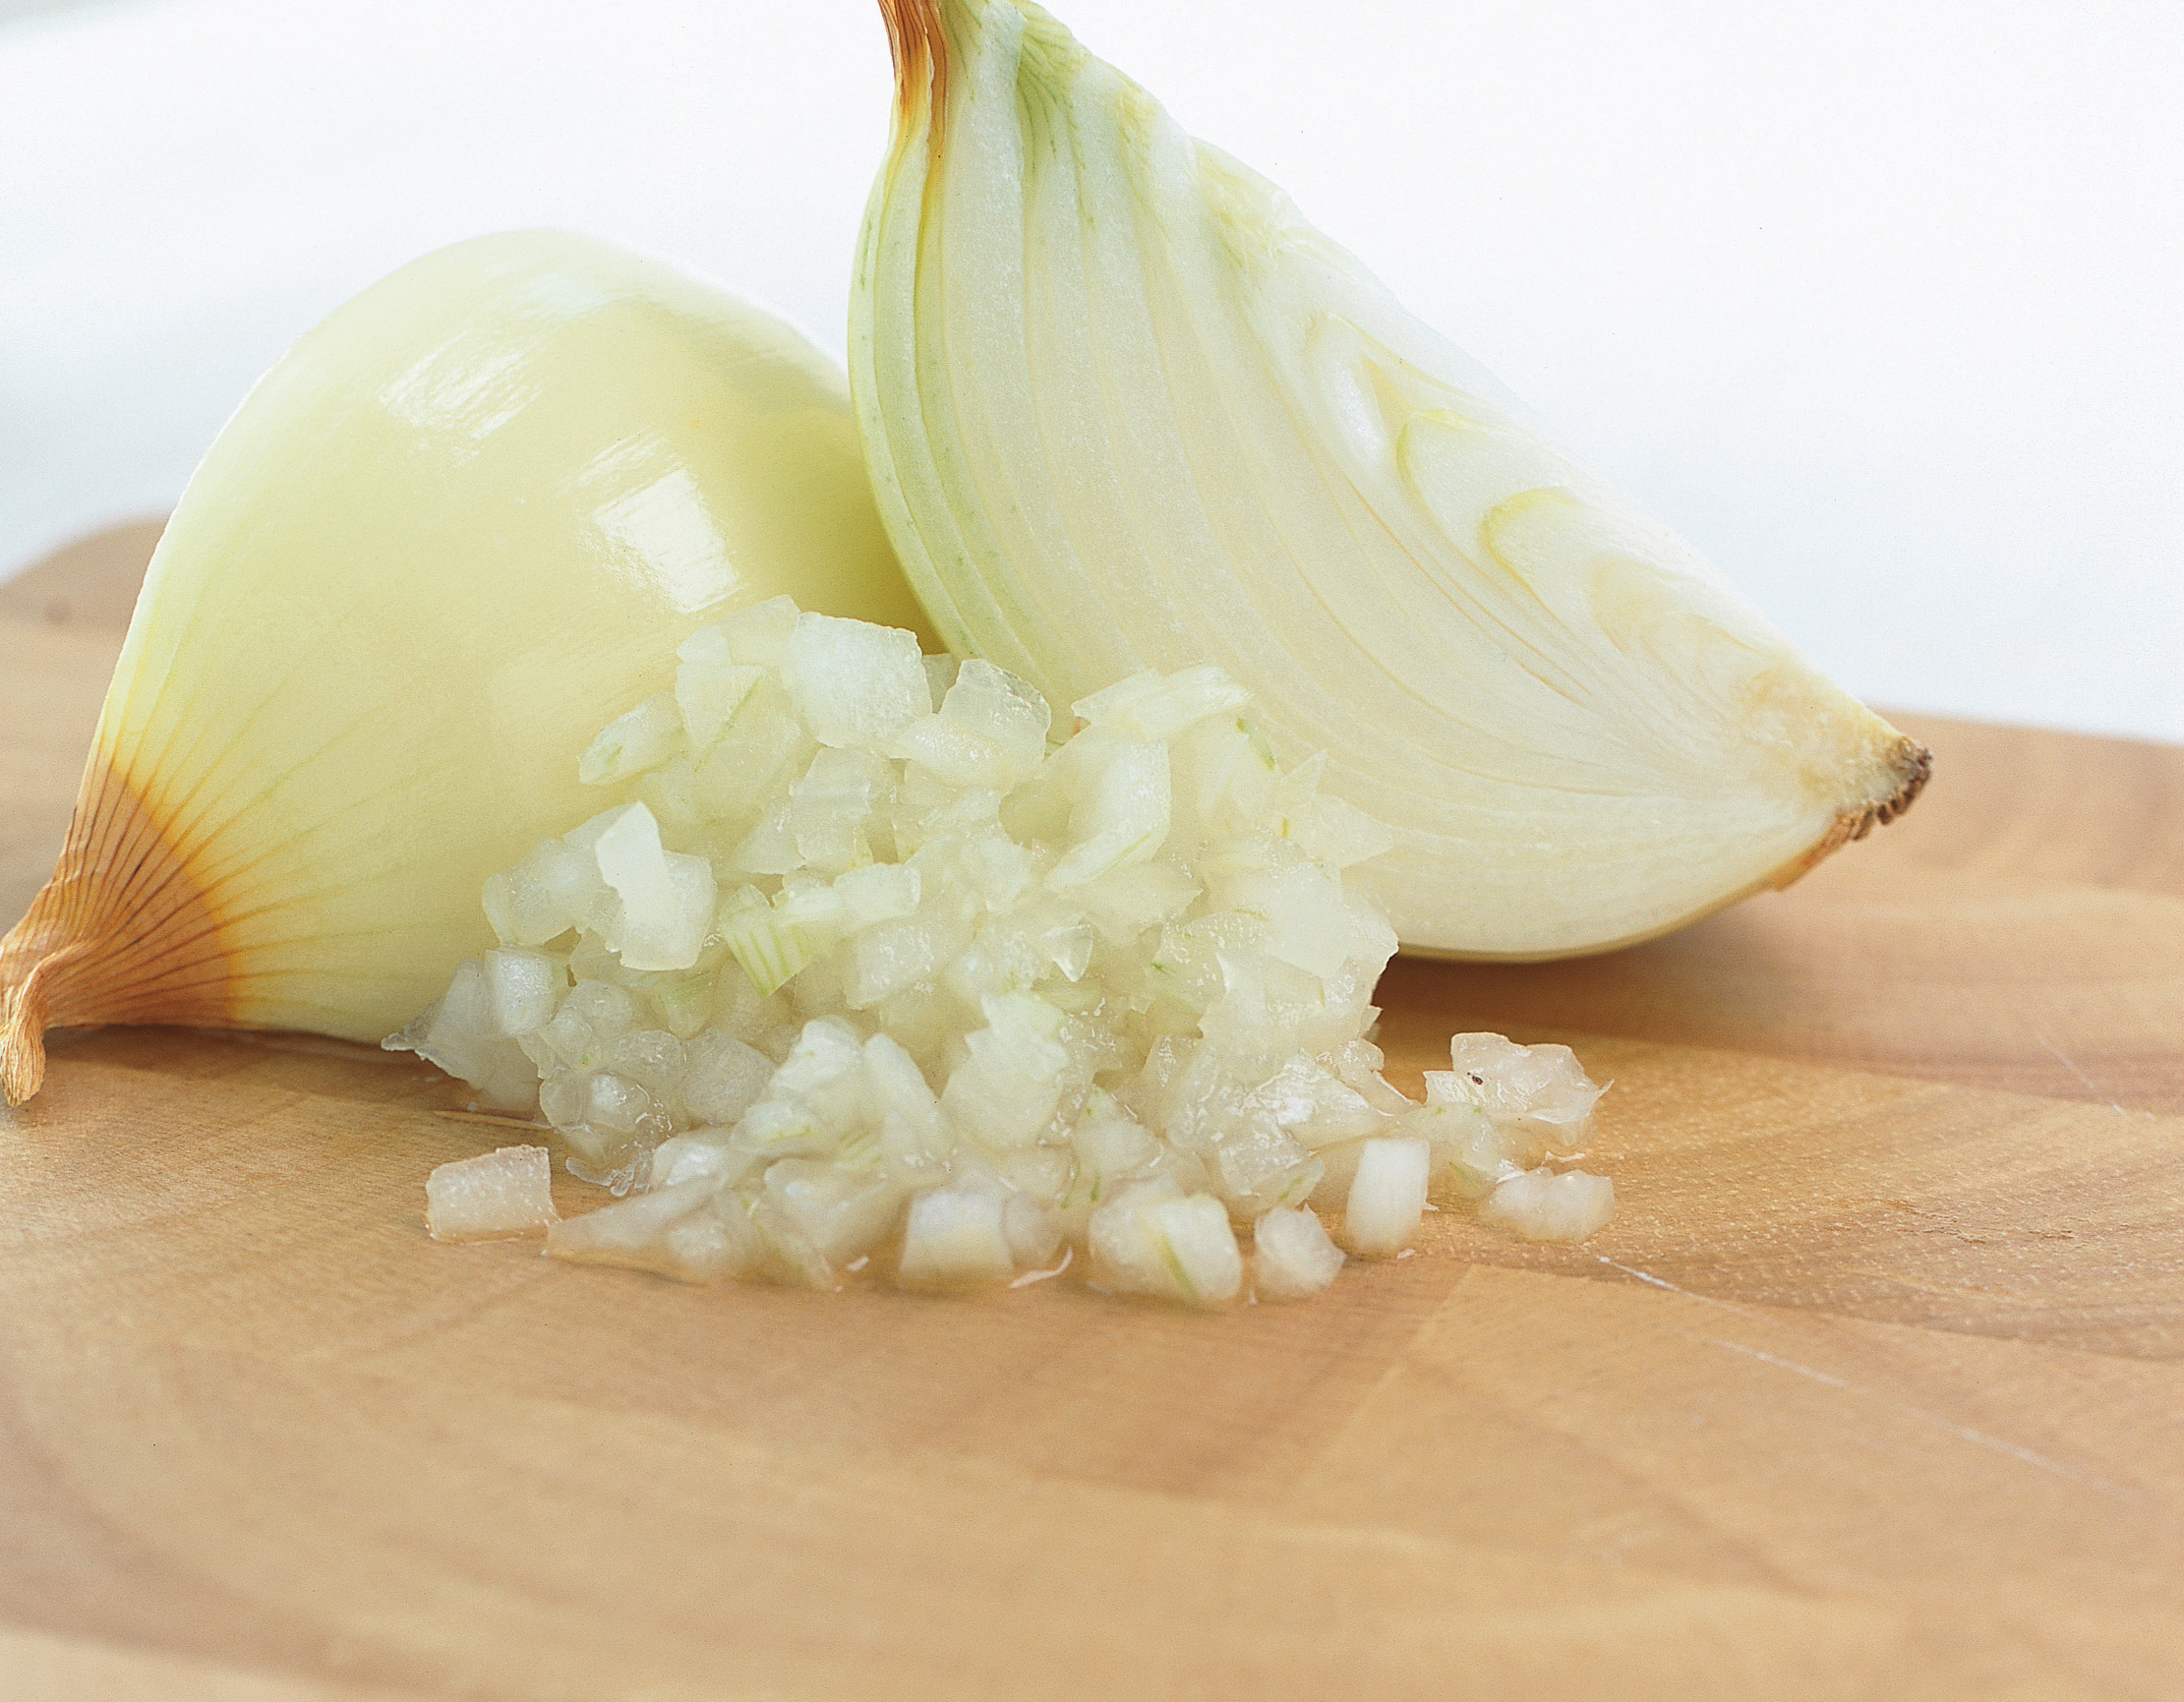 The More You Cut an Onion, The Stronger It Will Taste